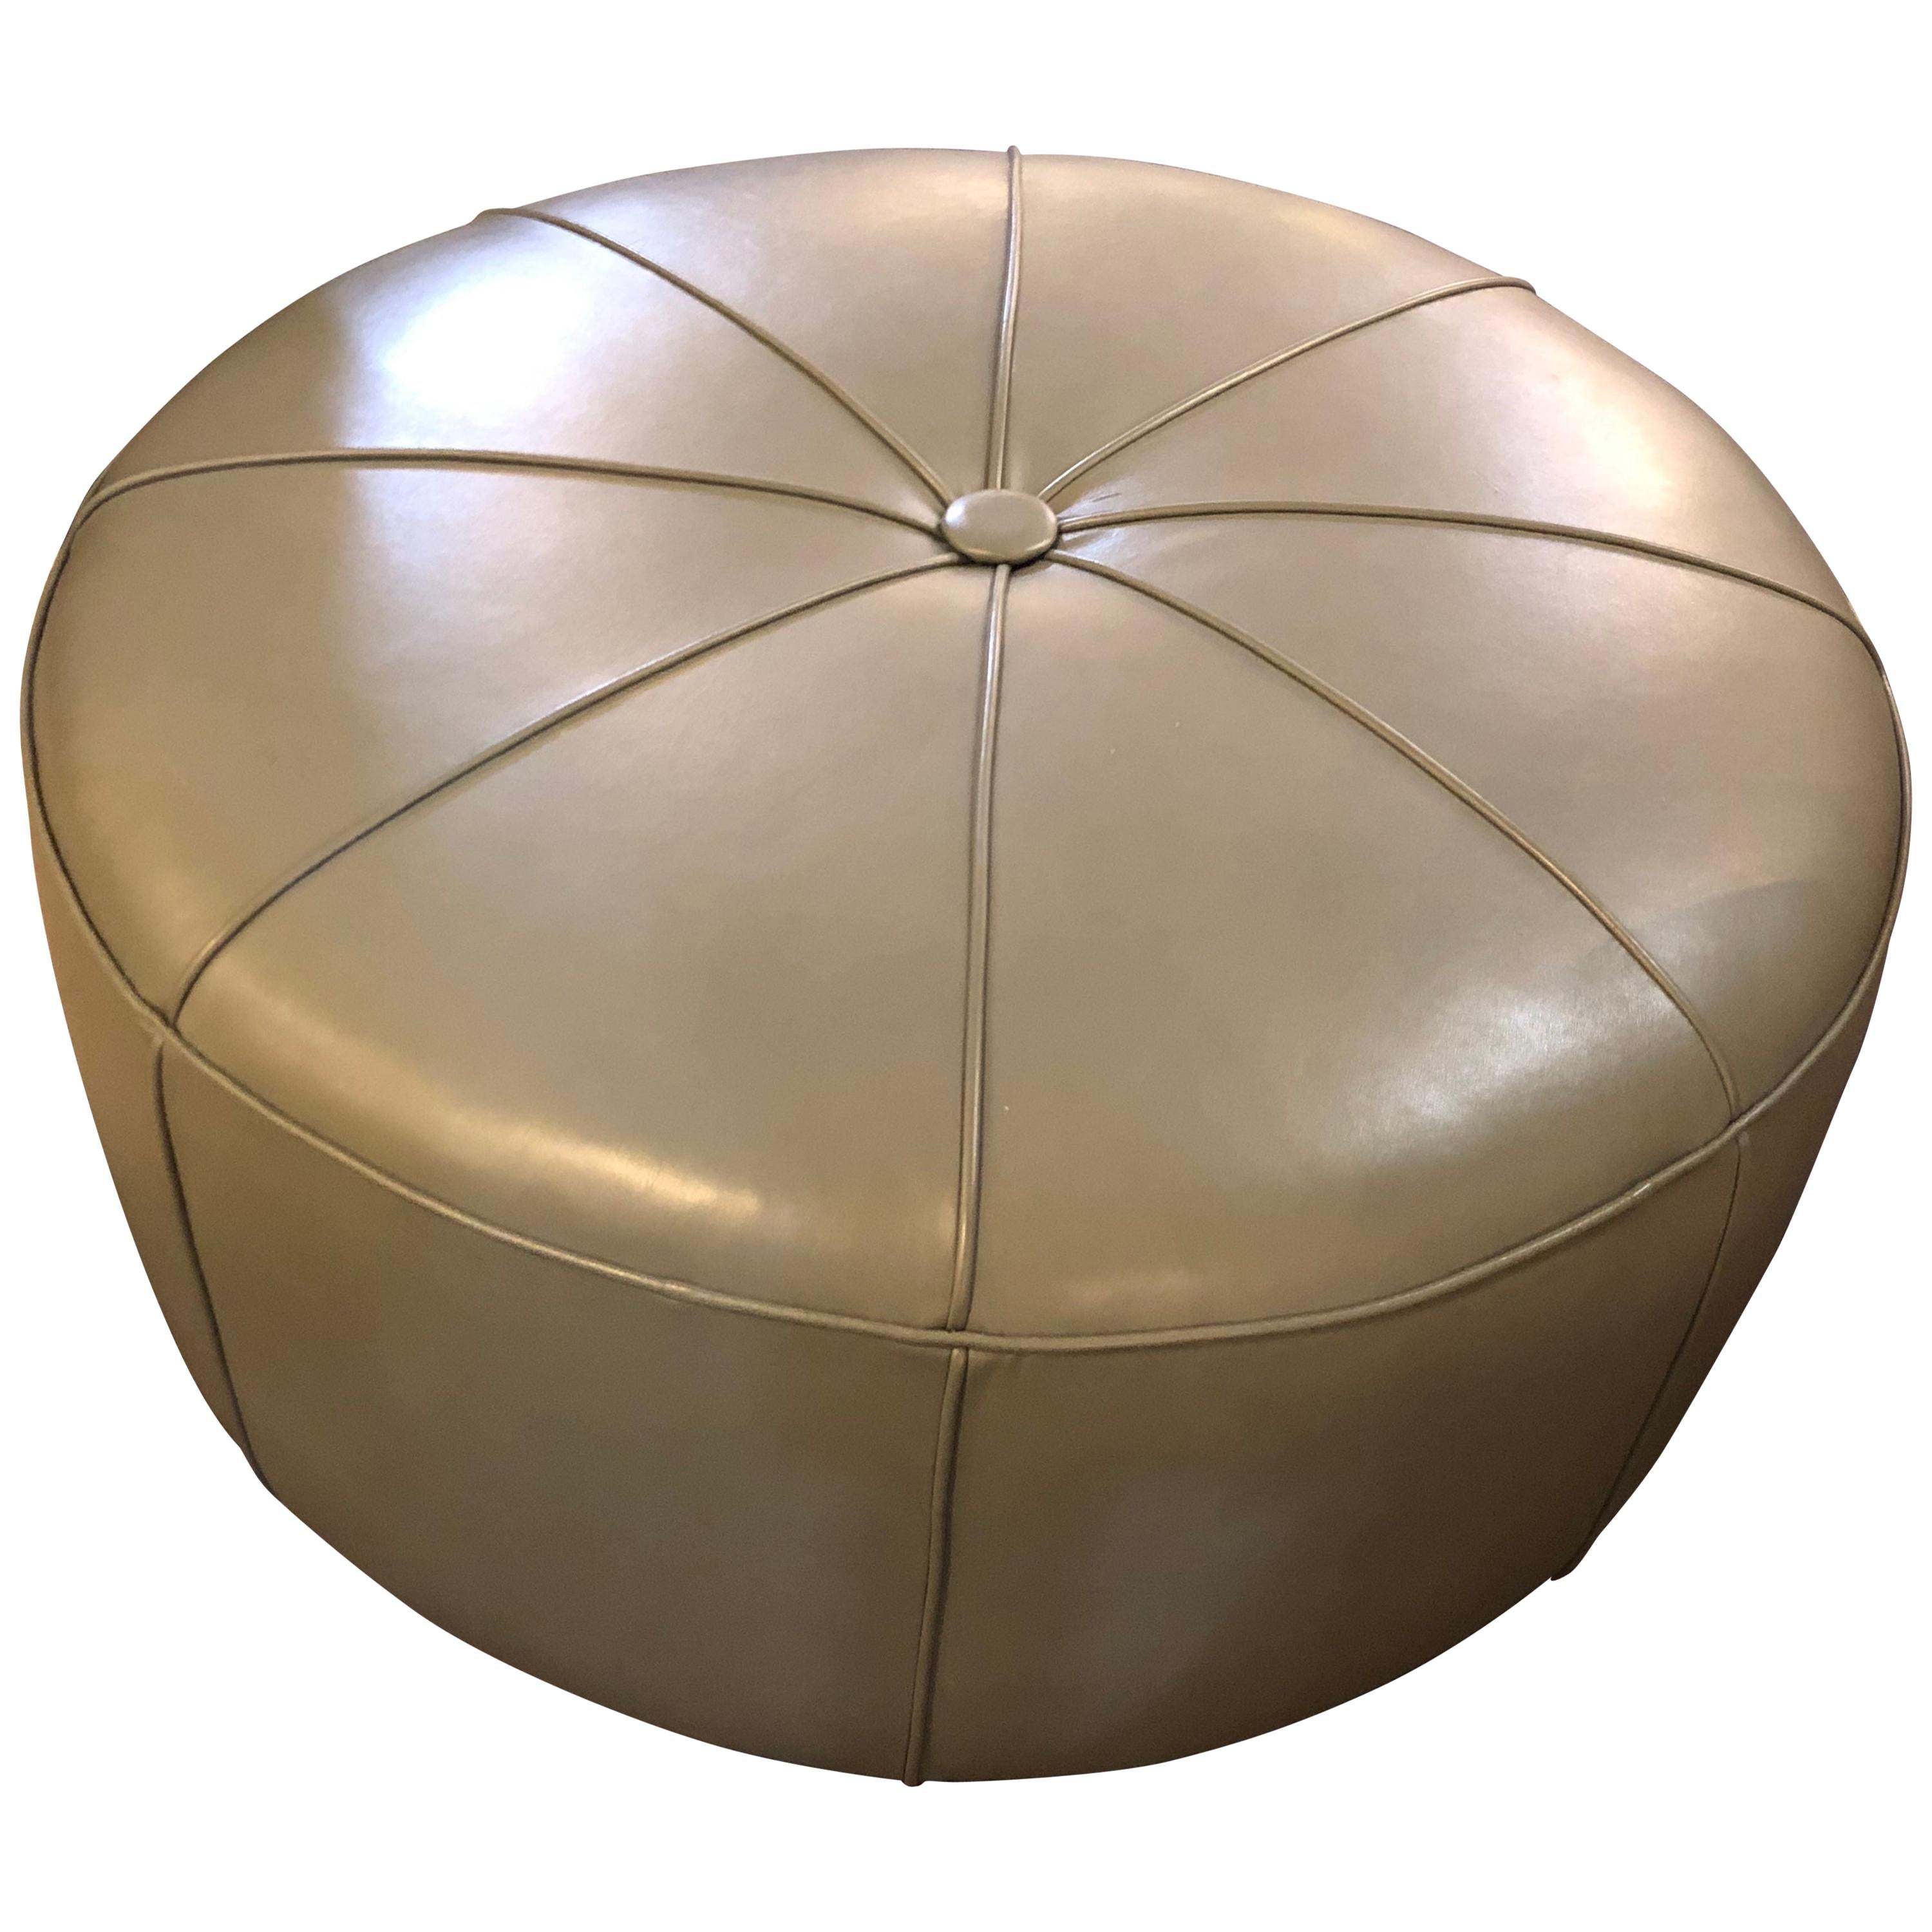 Leather Modern Mint Ottoman or Poof in Pie Form